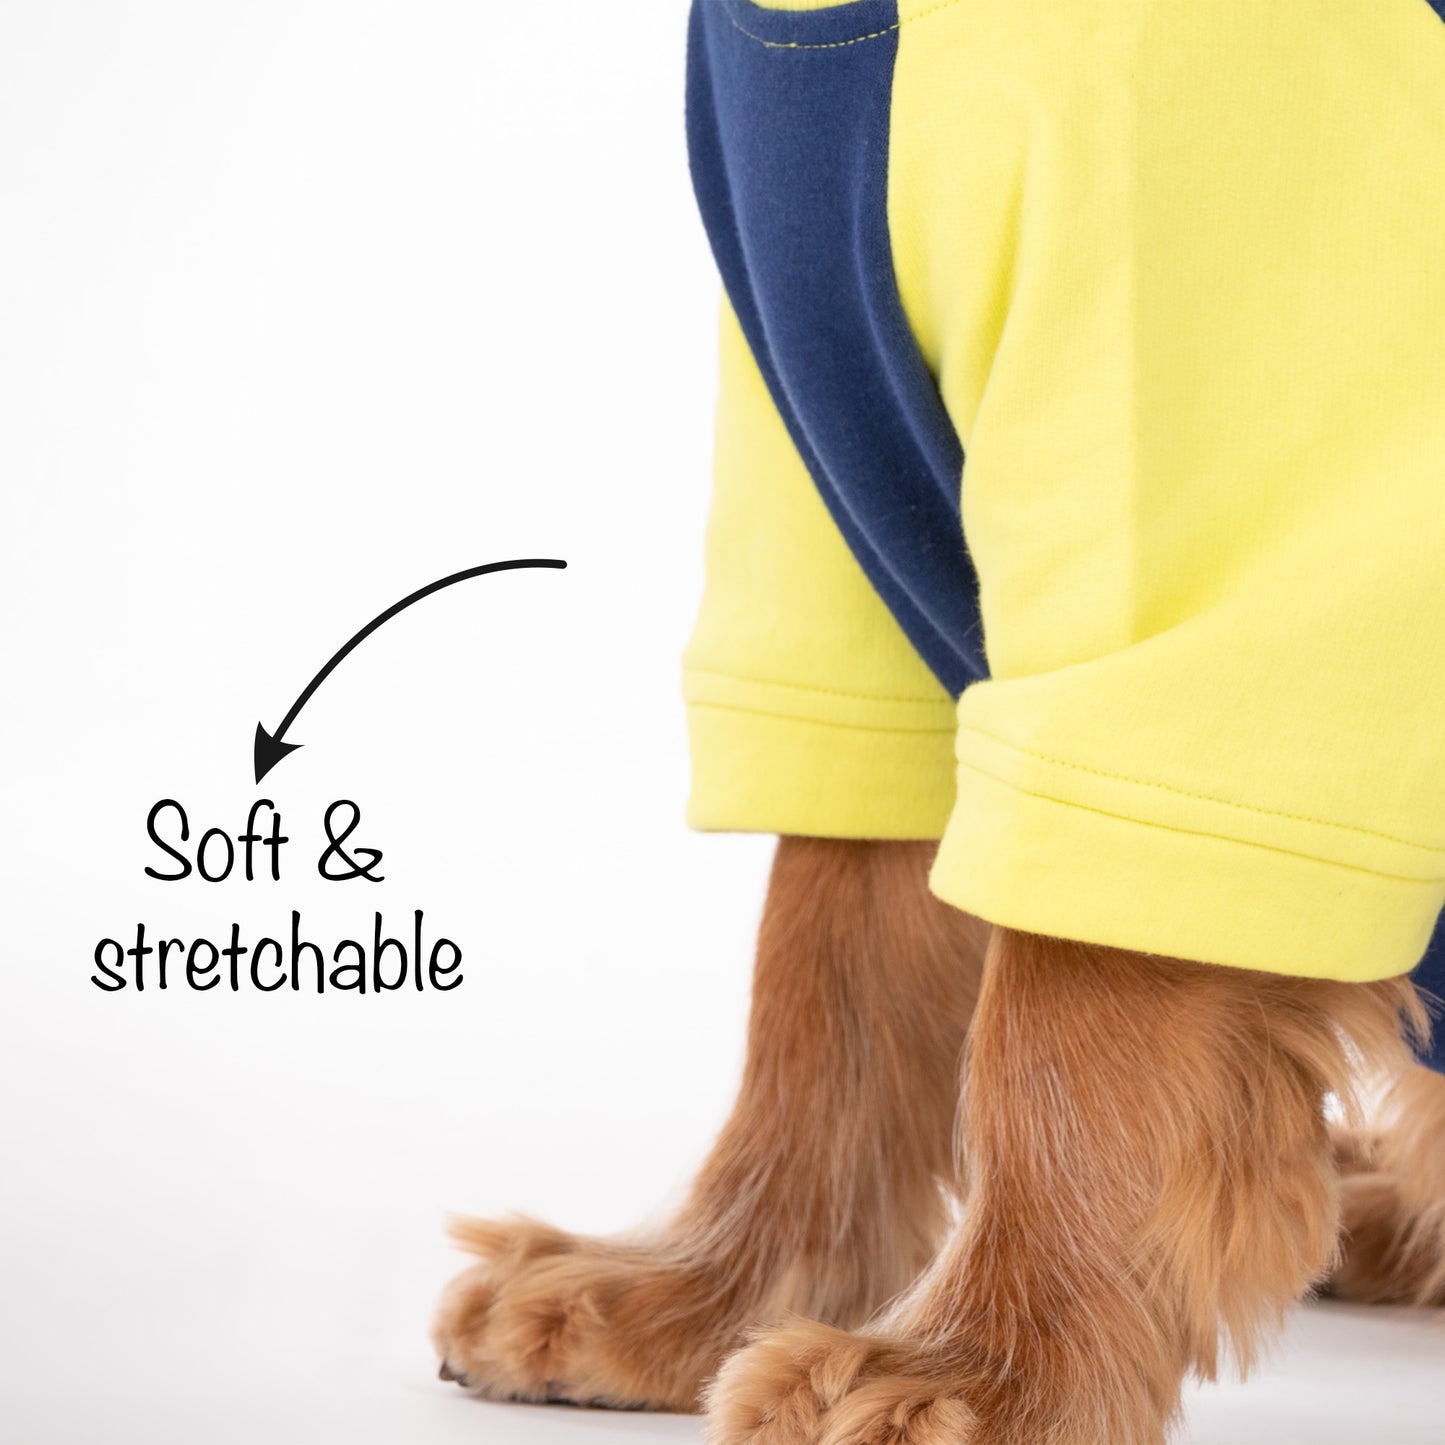 HUFT Colour Block Pocket Pet Sweatshirt - Neon Lime and Navy - Heads Up For Tails